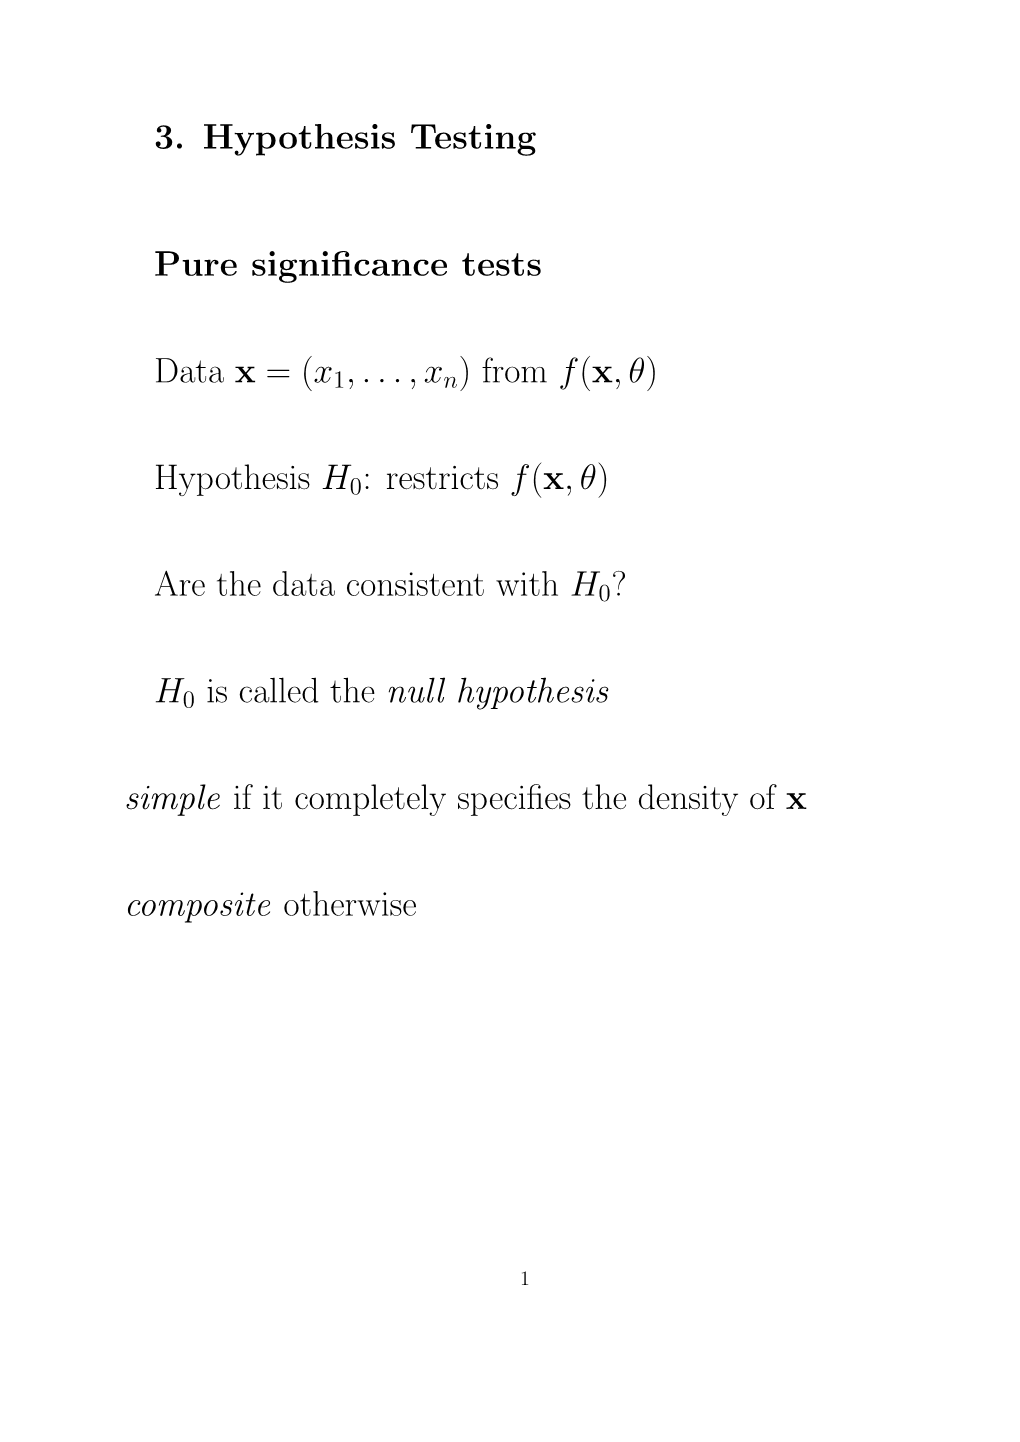 3. Hypothesis Testing Pure Significance Tests Data X = (X 1,...,Xn)